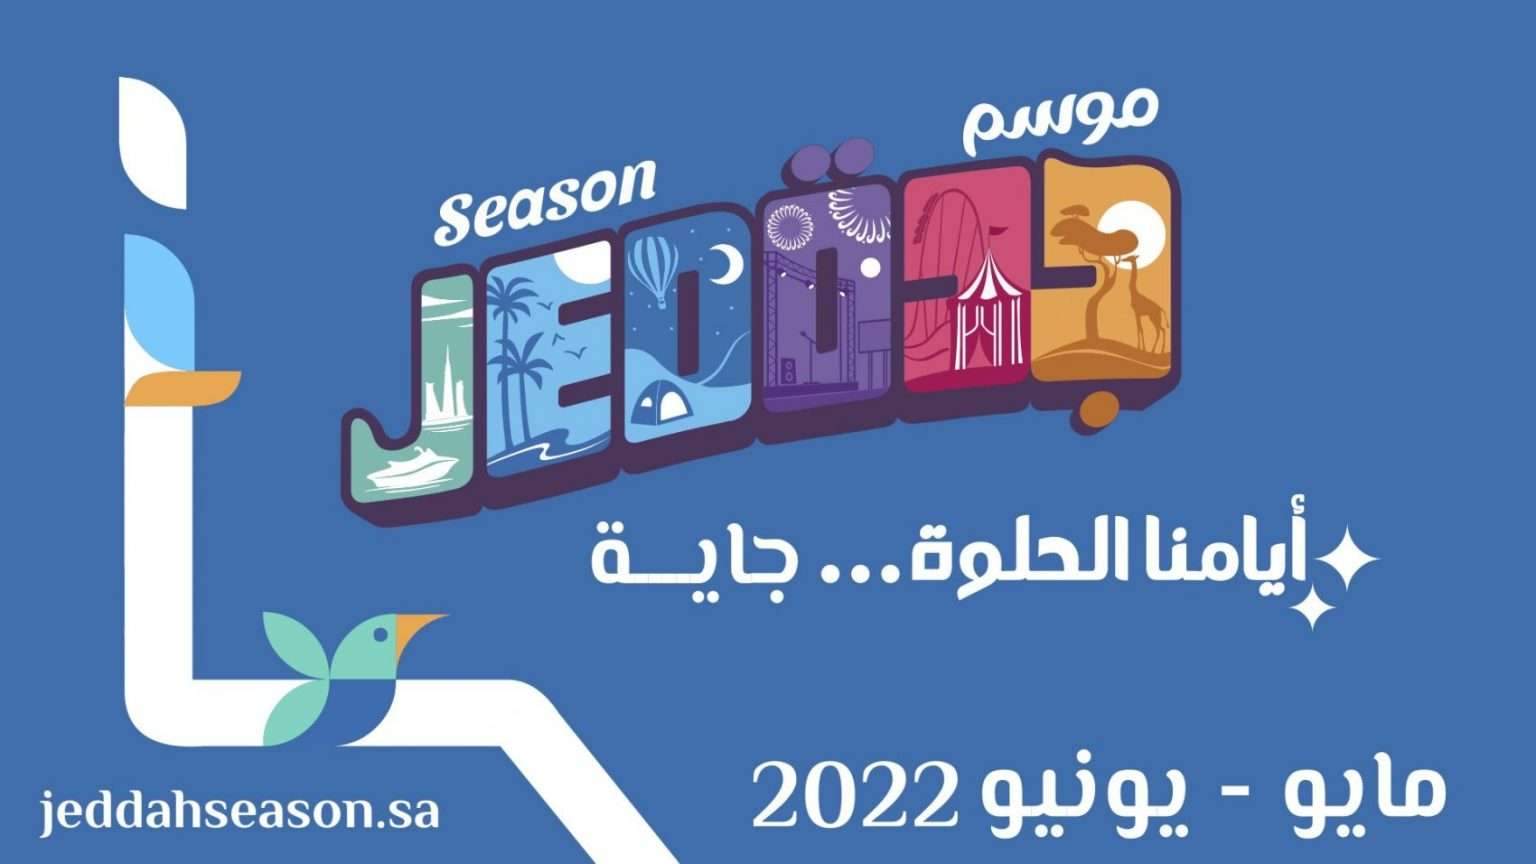 The Bride of the Red Sea receives the 2022 Jeddah season under the slogan Our Good Days